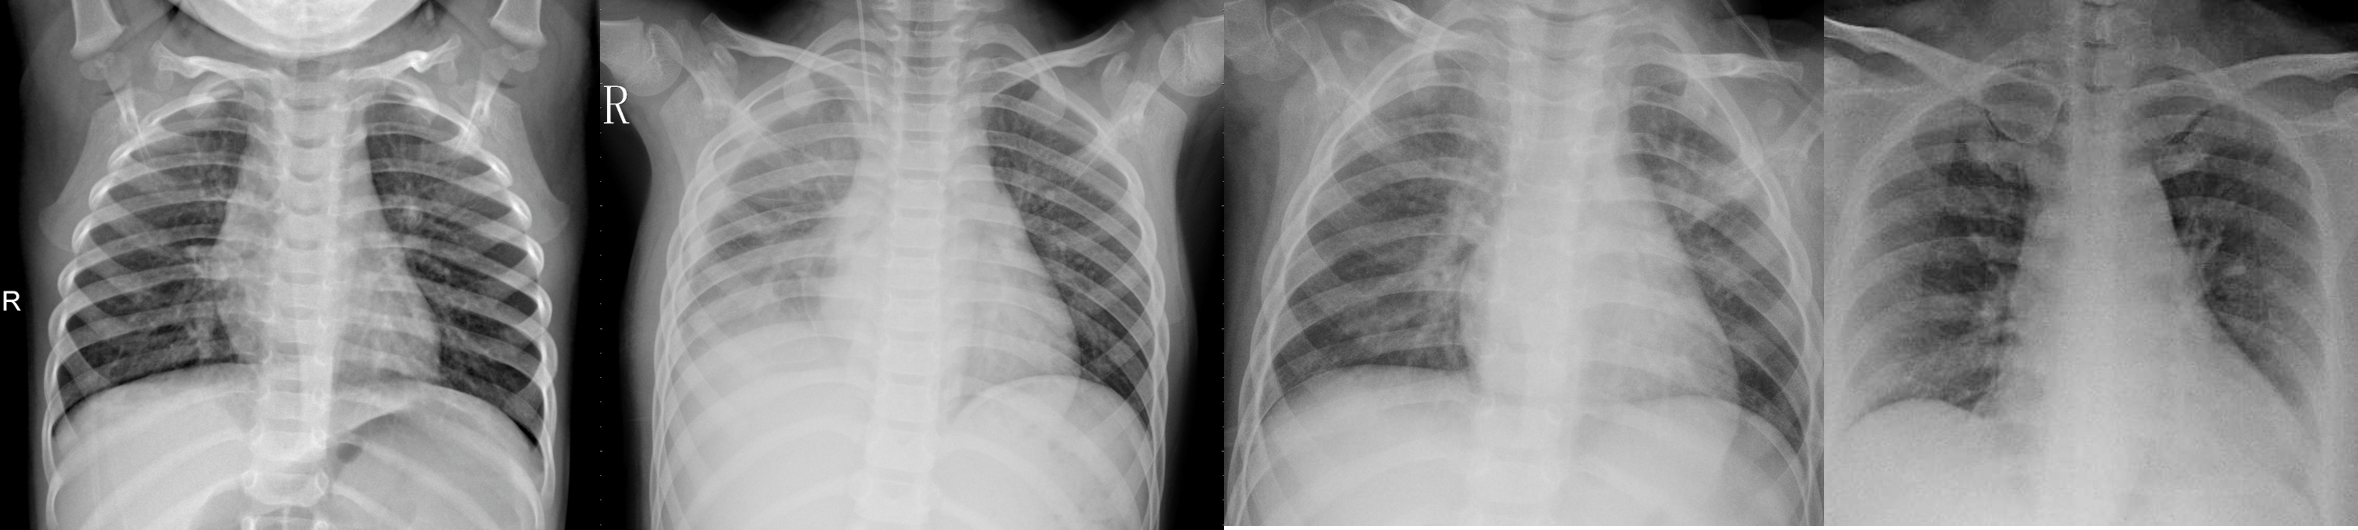 Detecting Covid 19 Induced Pneumonia From Chest X Rays With Transfer Learning An Implementation In Tensorflow And Keras By Adrian Yijie Xu Towards Data Science